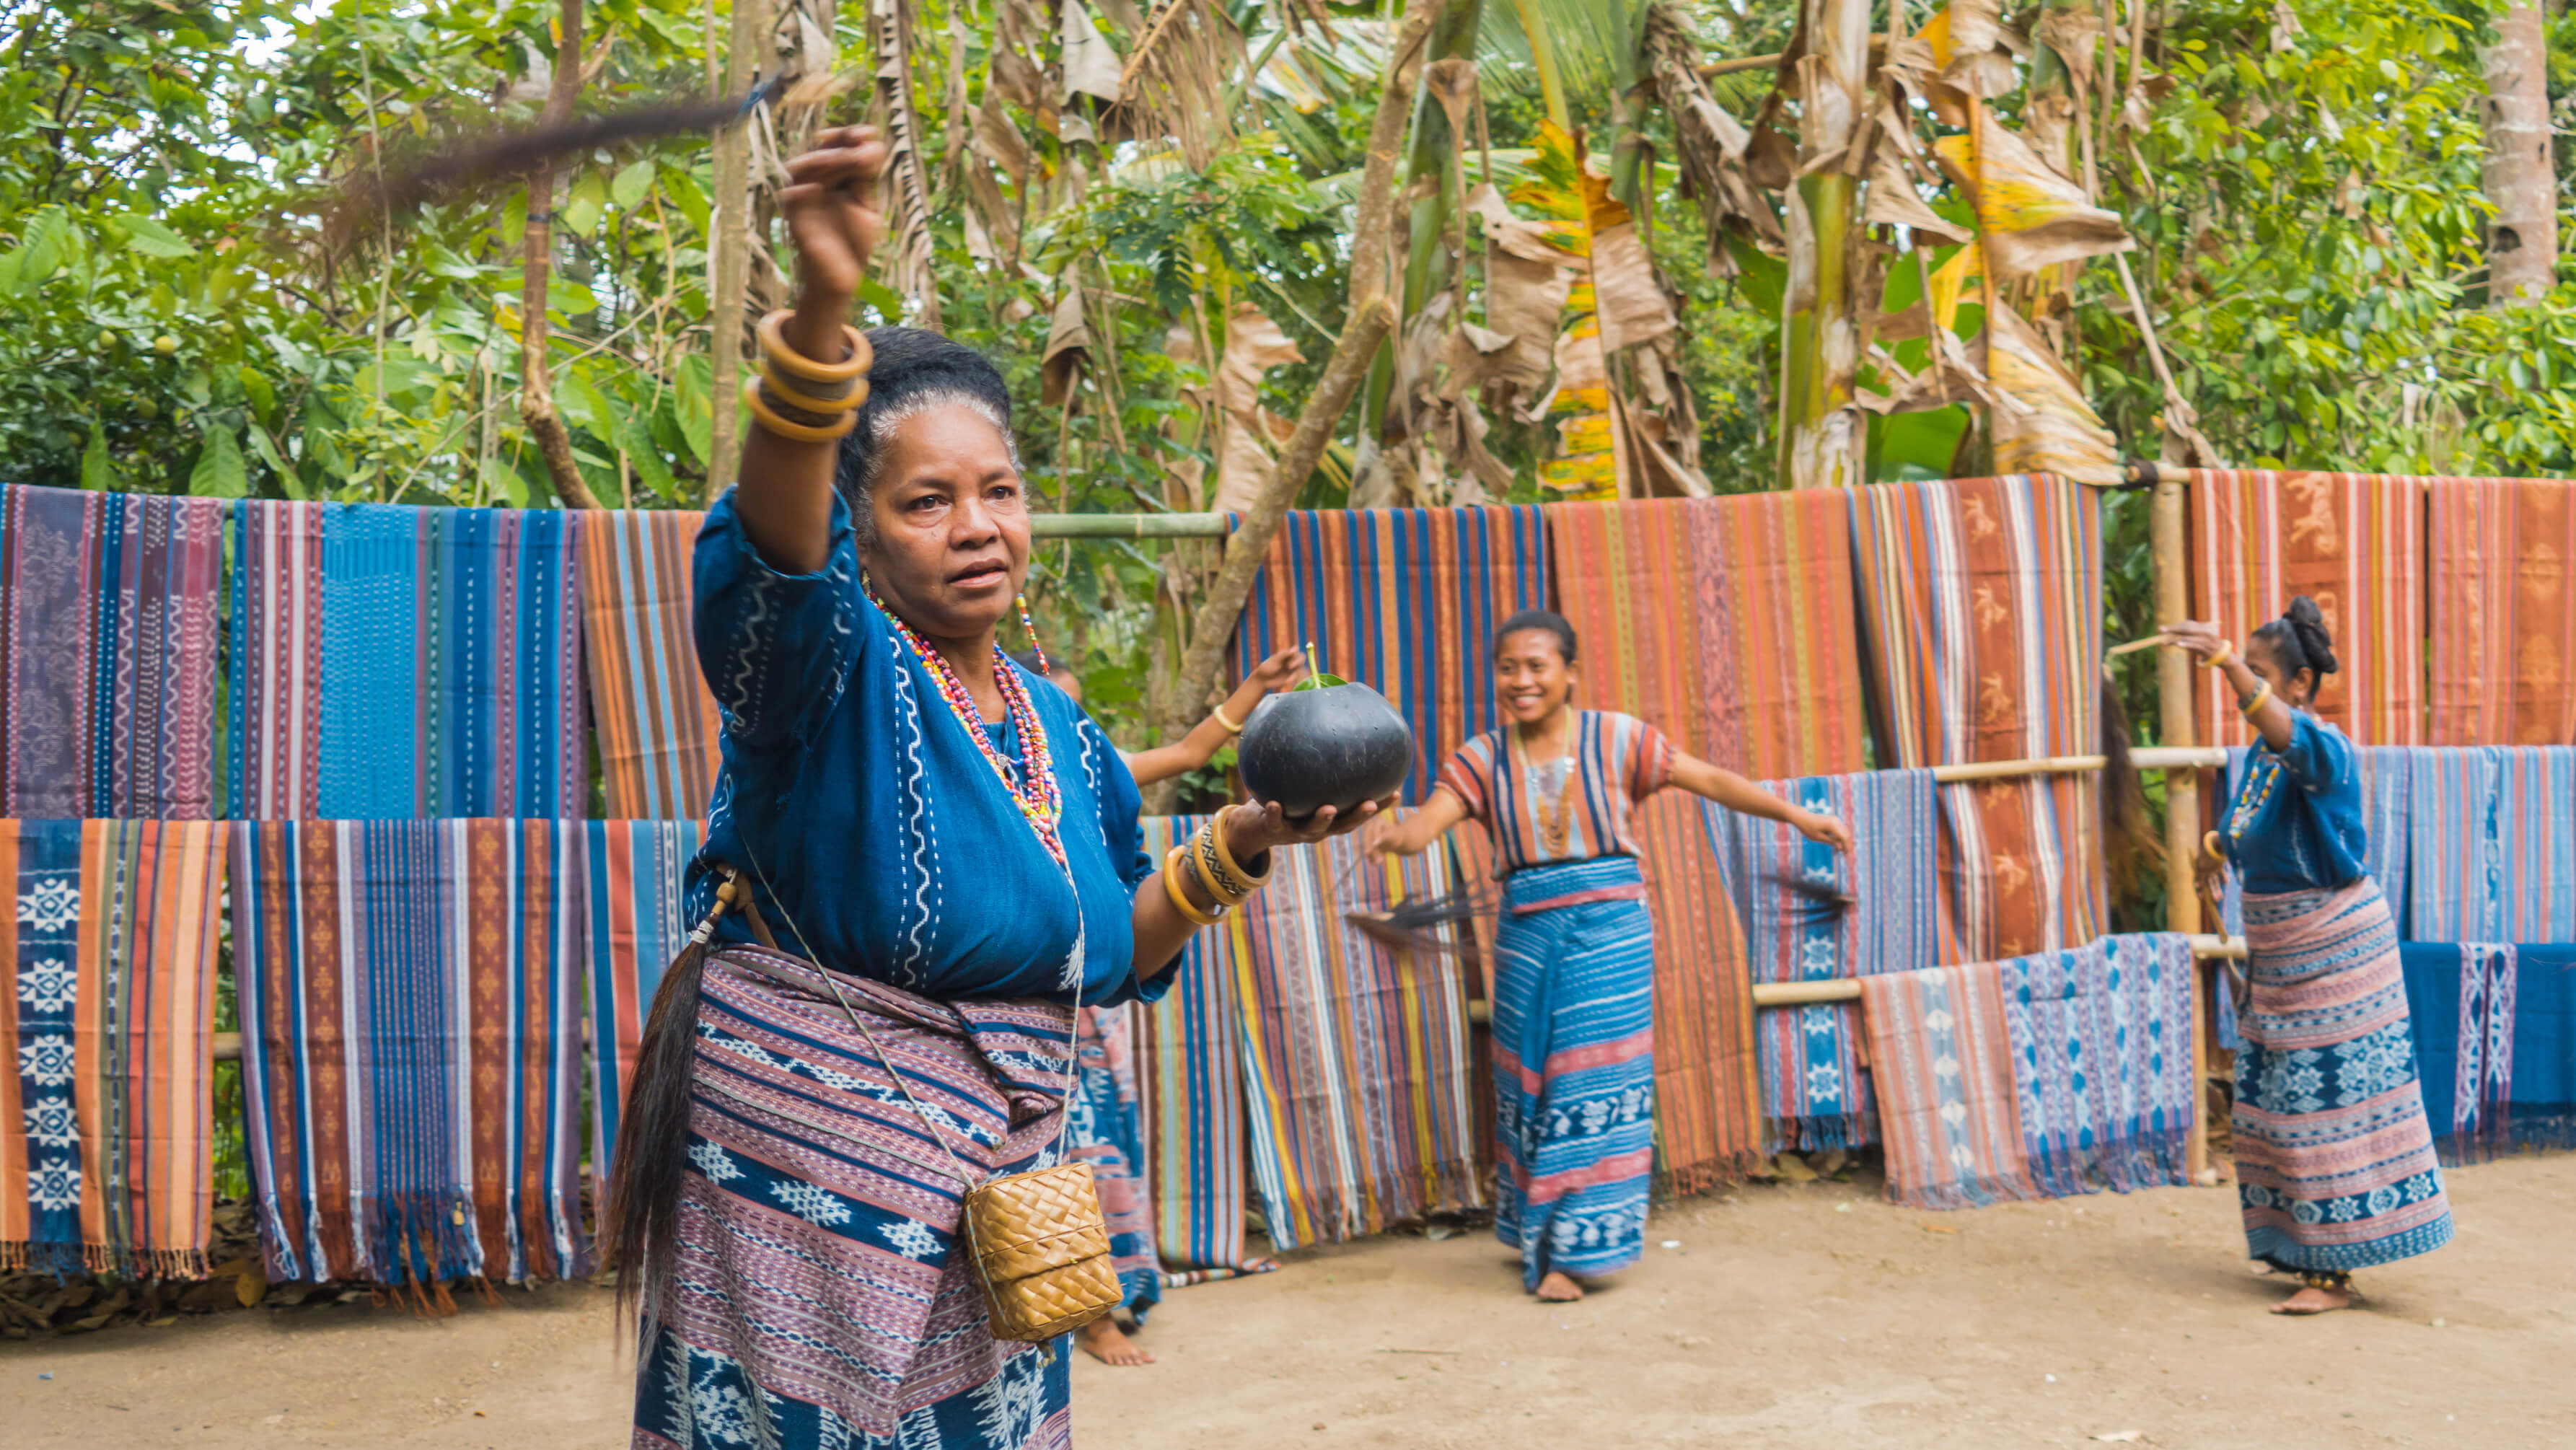 Virgensia Nurak (foreground) performs a welcome dance for guests with a ritual sprinkling of water from a brush. Photo by Andra Fembriarto